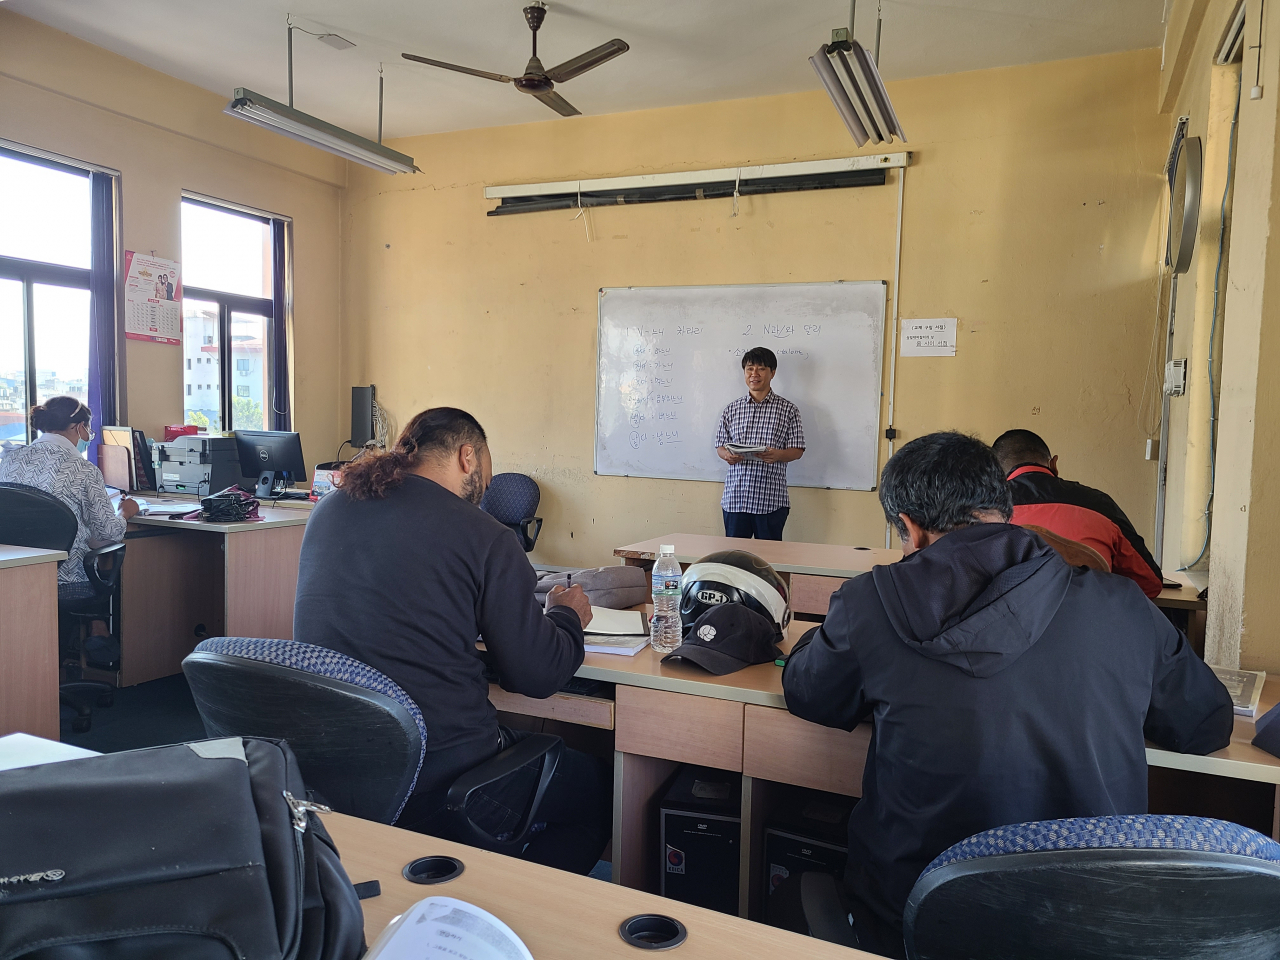 Hyeon Woo-taek, after spending 20 years teaching at Korean elementary schools, teaches Korean to a group of Nepalese students at a university in Kathmandu. (Courtesy of Hyeon)